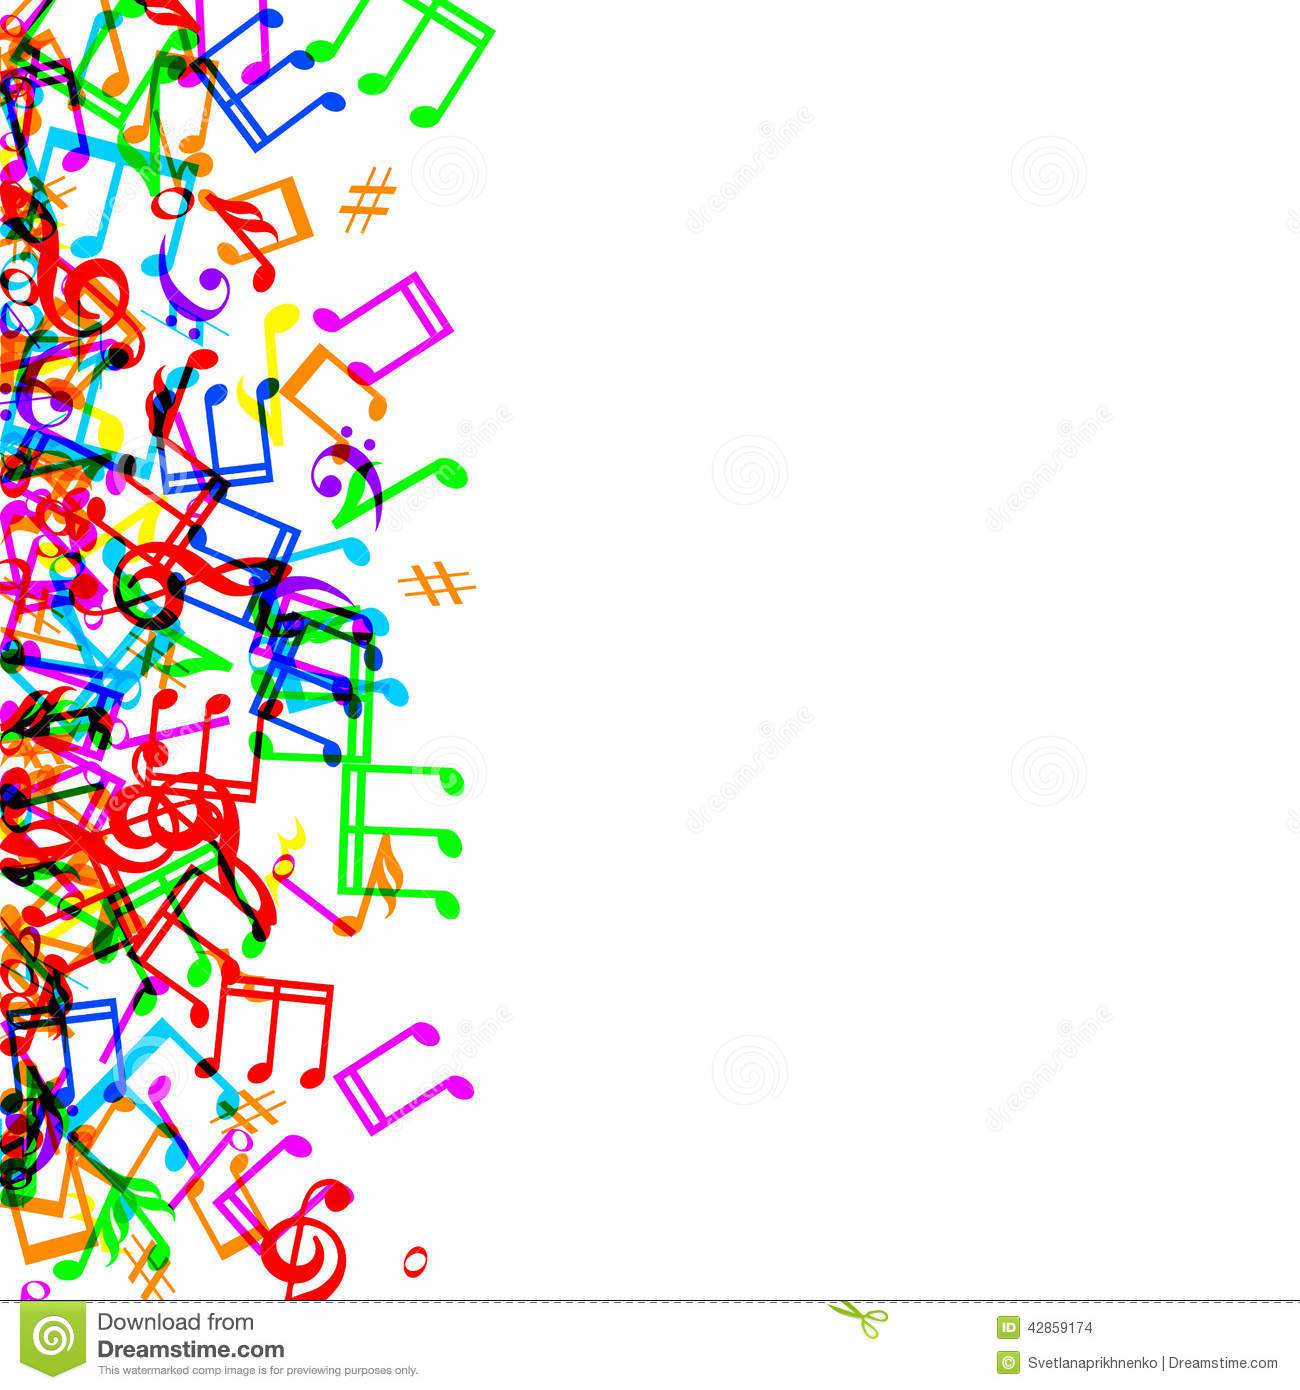 Colorful Music Note Border Clip Art Music Notes Border Colorful Frame